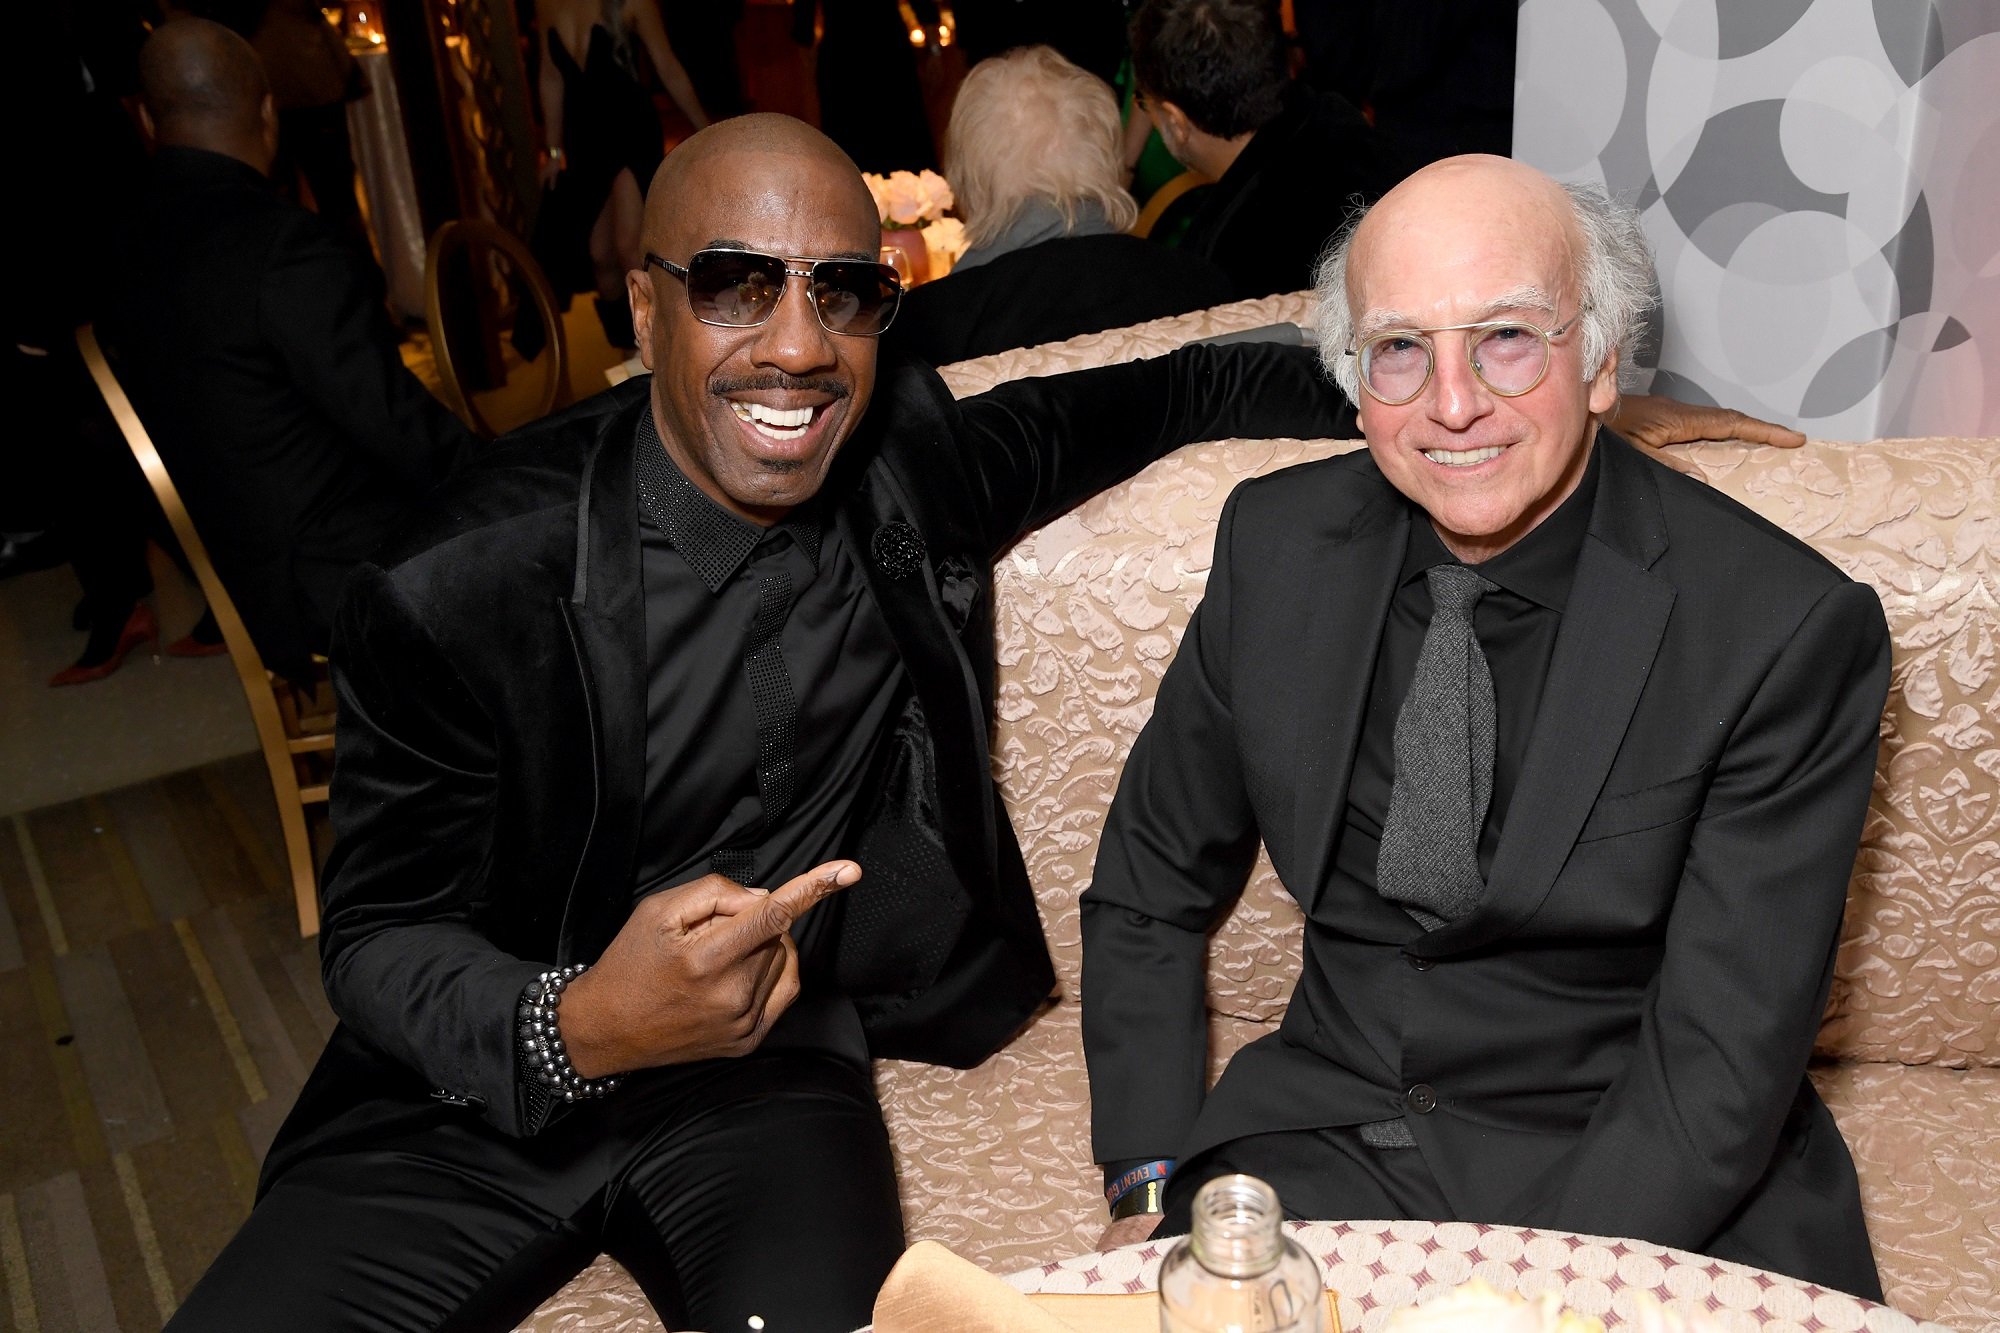 J.B. Smoove and Larry David of Curb Your Enthusiasm